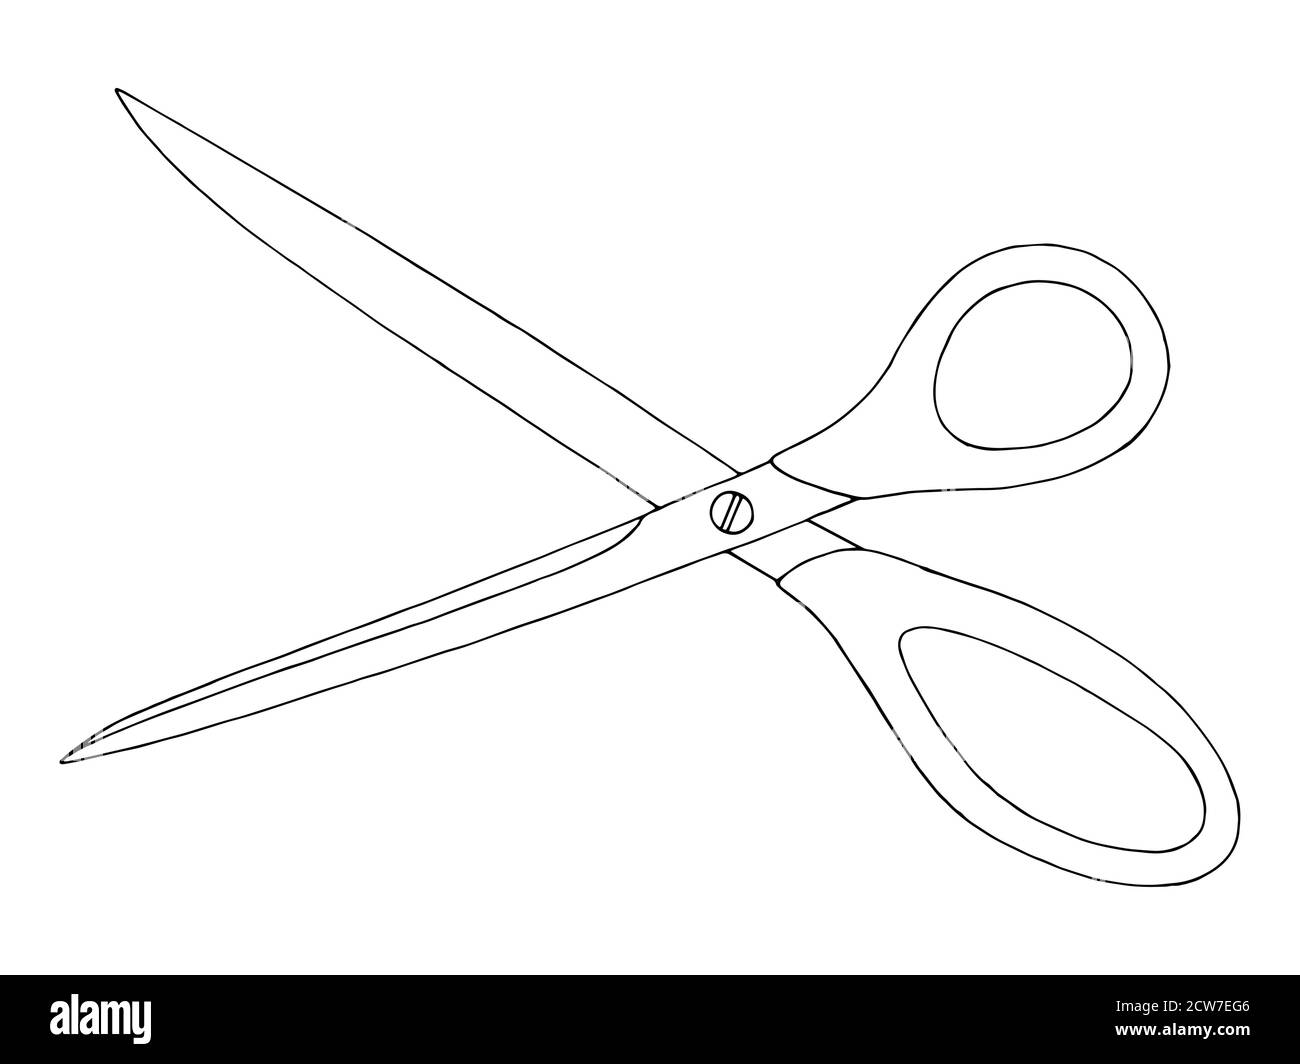 Scissors Images  Buttonhole Scissors Drawing HD Png Download   901x7203032221  PngFind